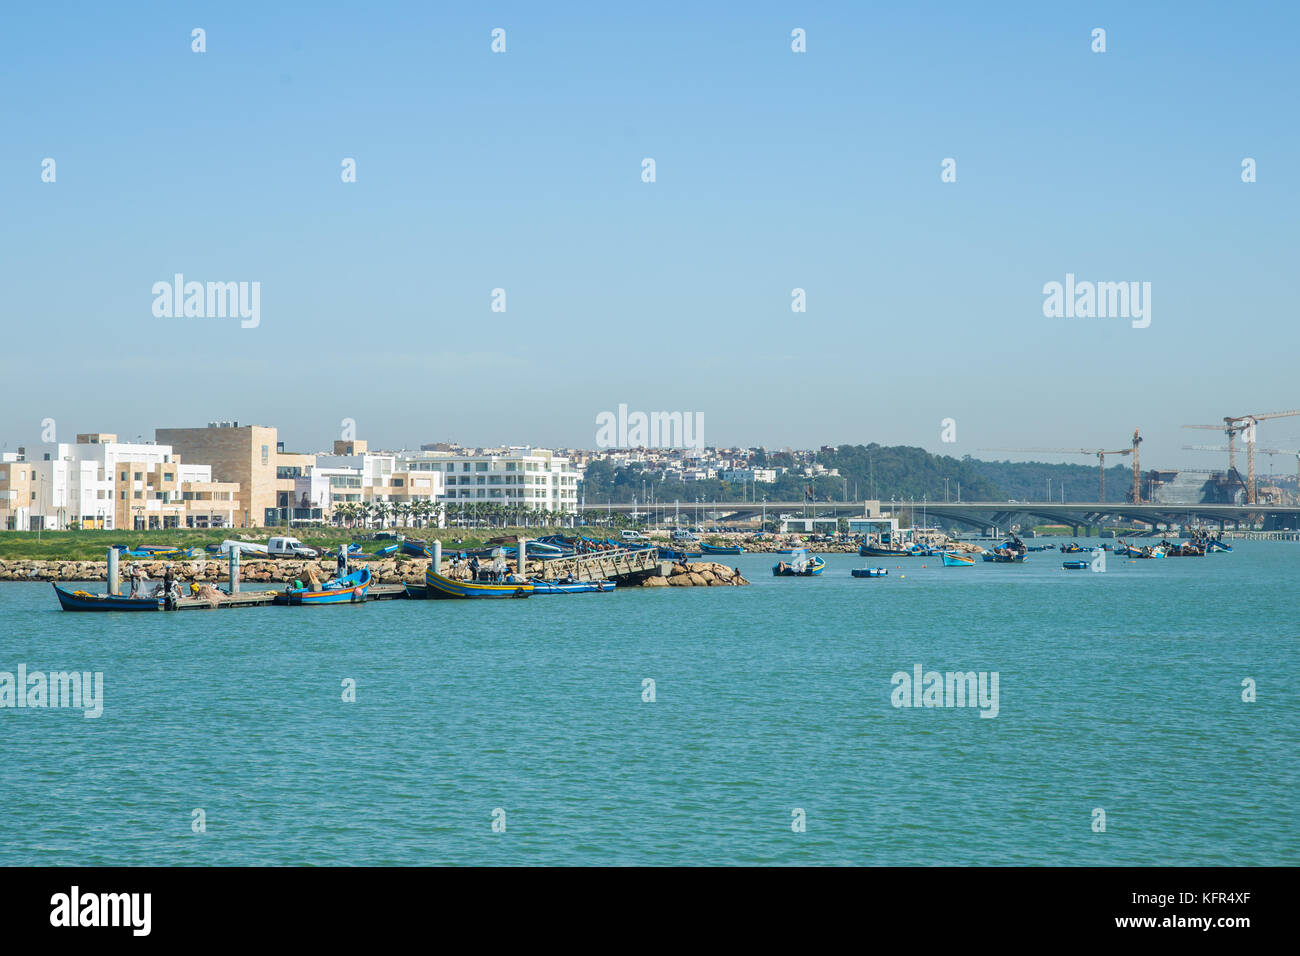 View from le dhow restaurant on sale marina, bouregreg river and projects Stock Photo